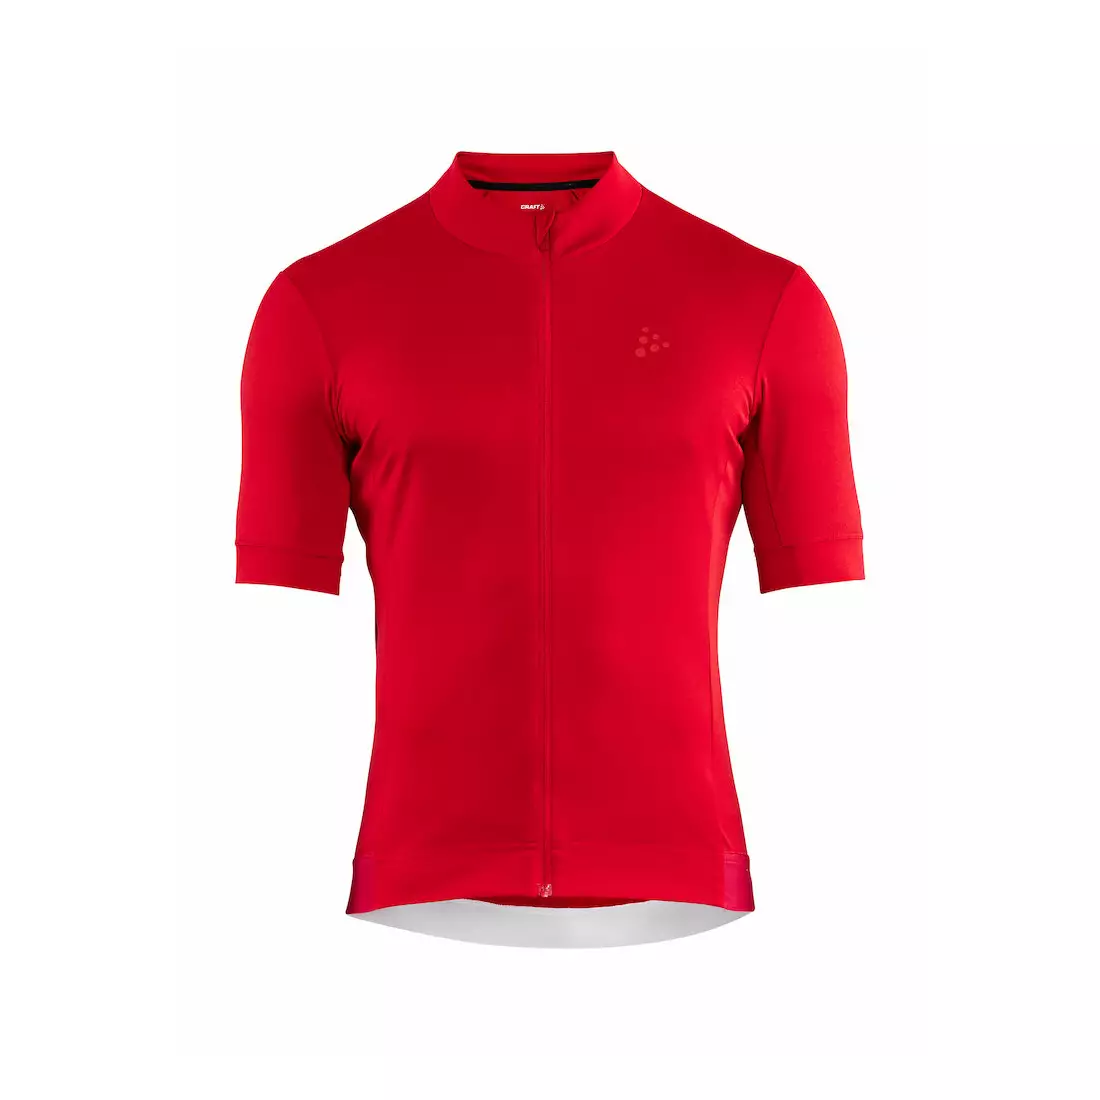 CRAFT ESSENCE men's cycling jersey red 1907156-430000